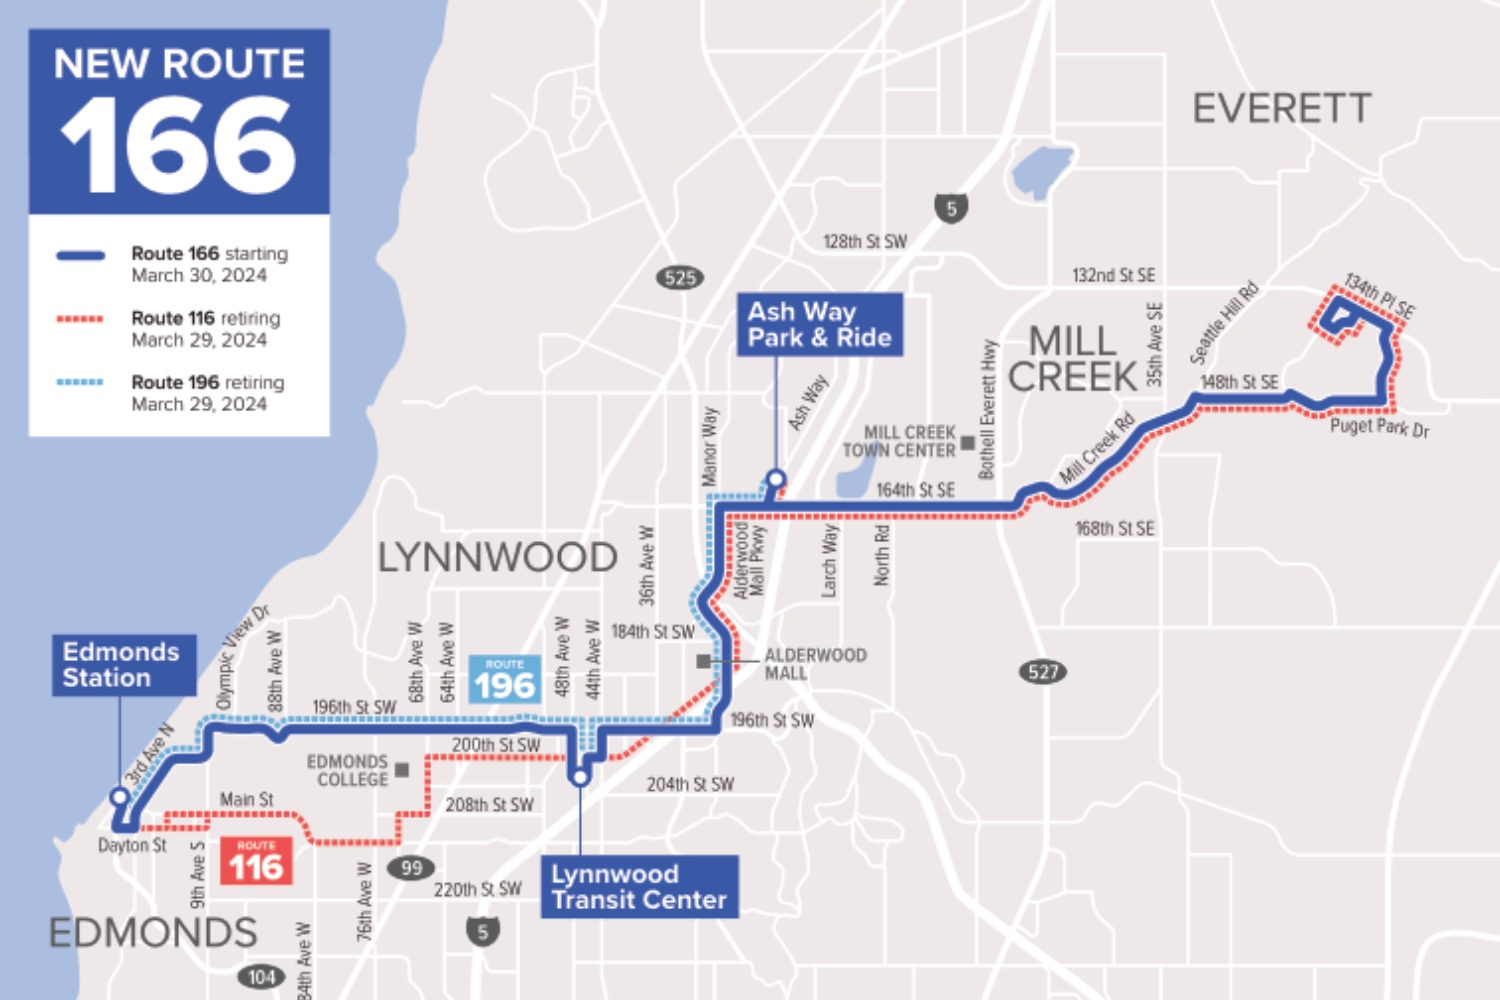 A map of the new route 166